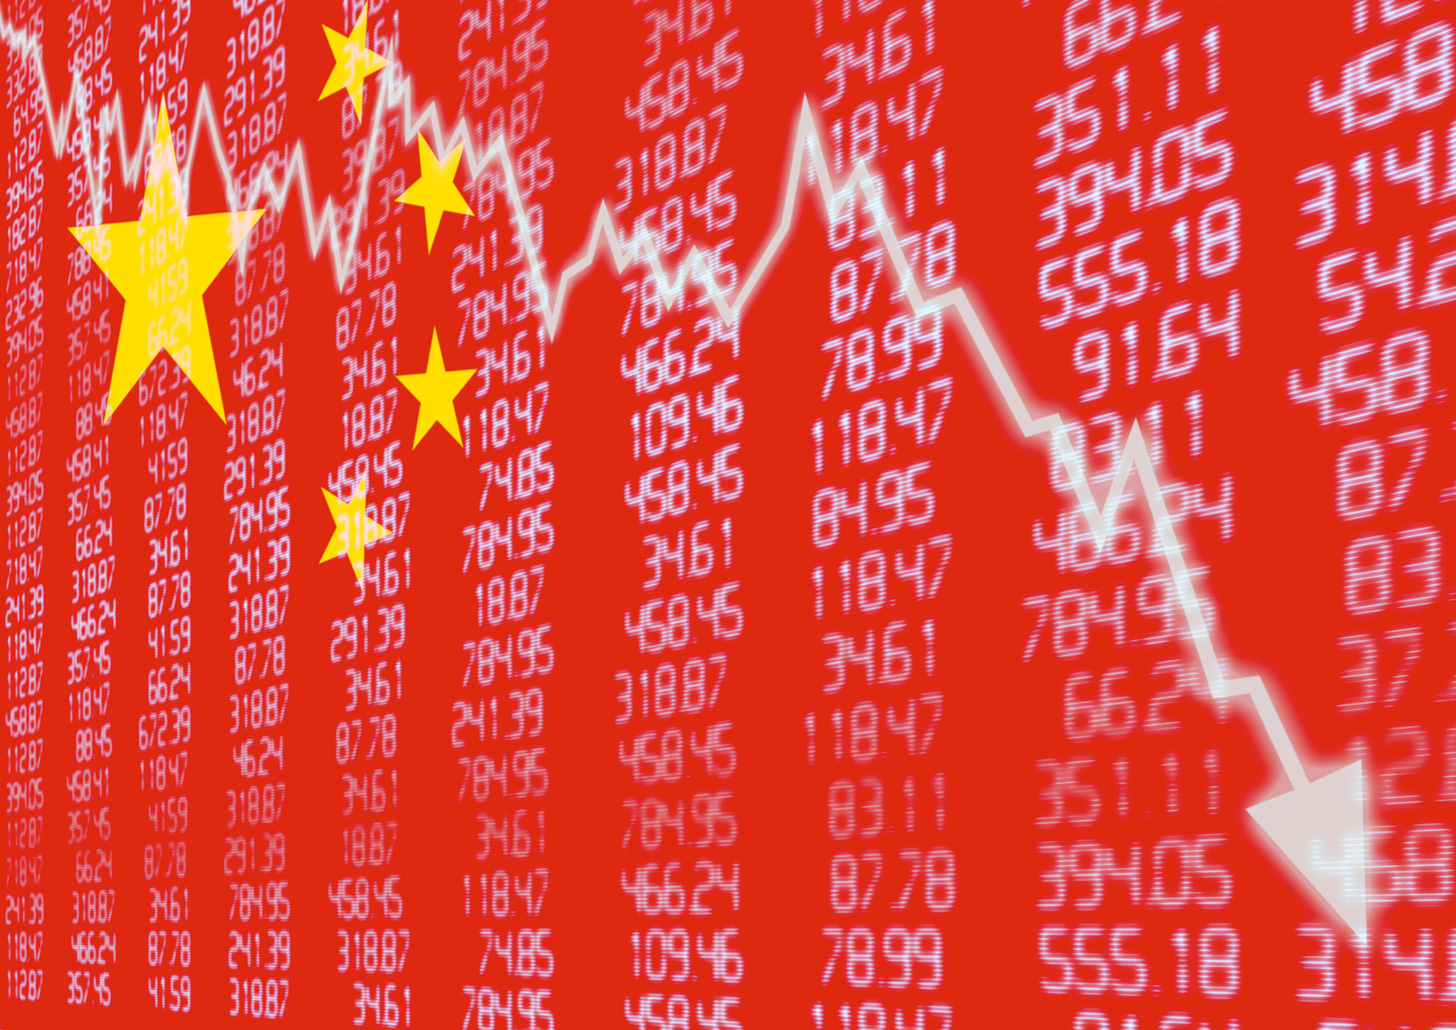 Why Alibaba and Other Chinese Stocks Sank Today | The Motley Fool